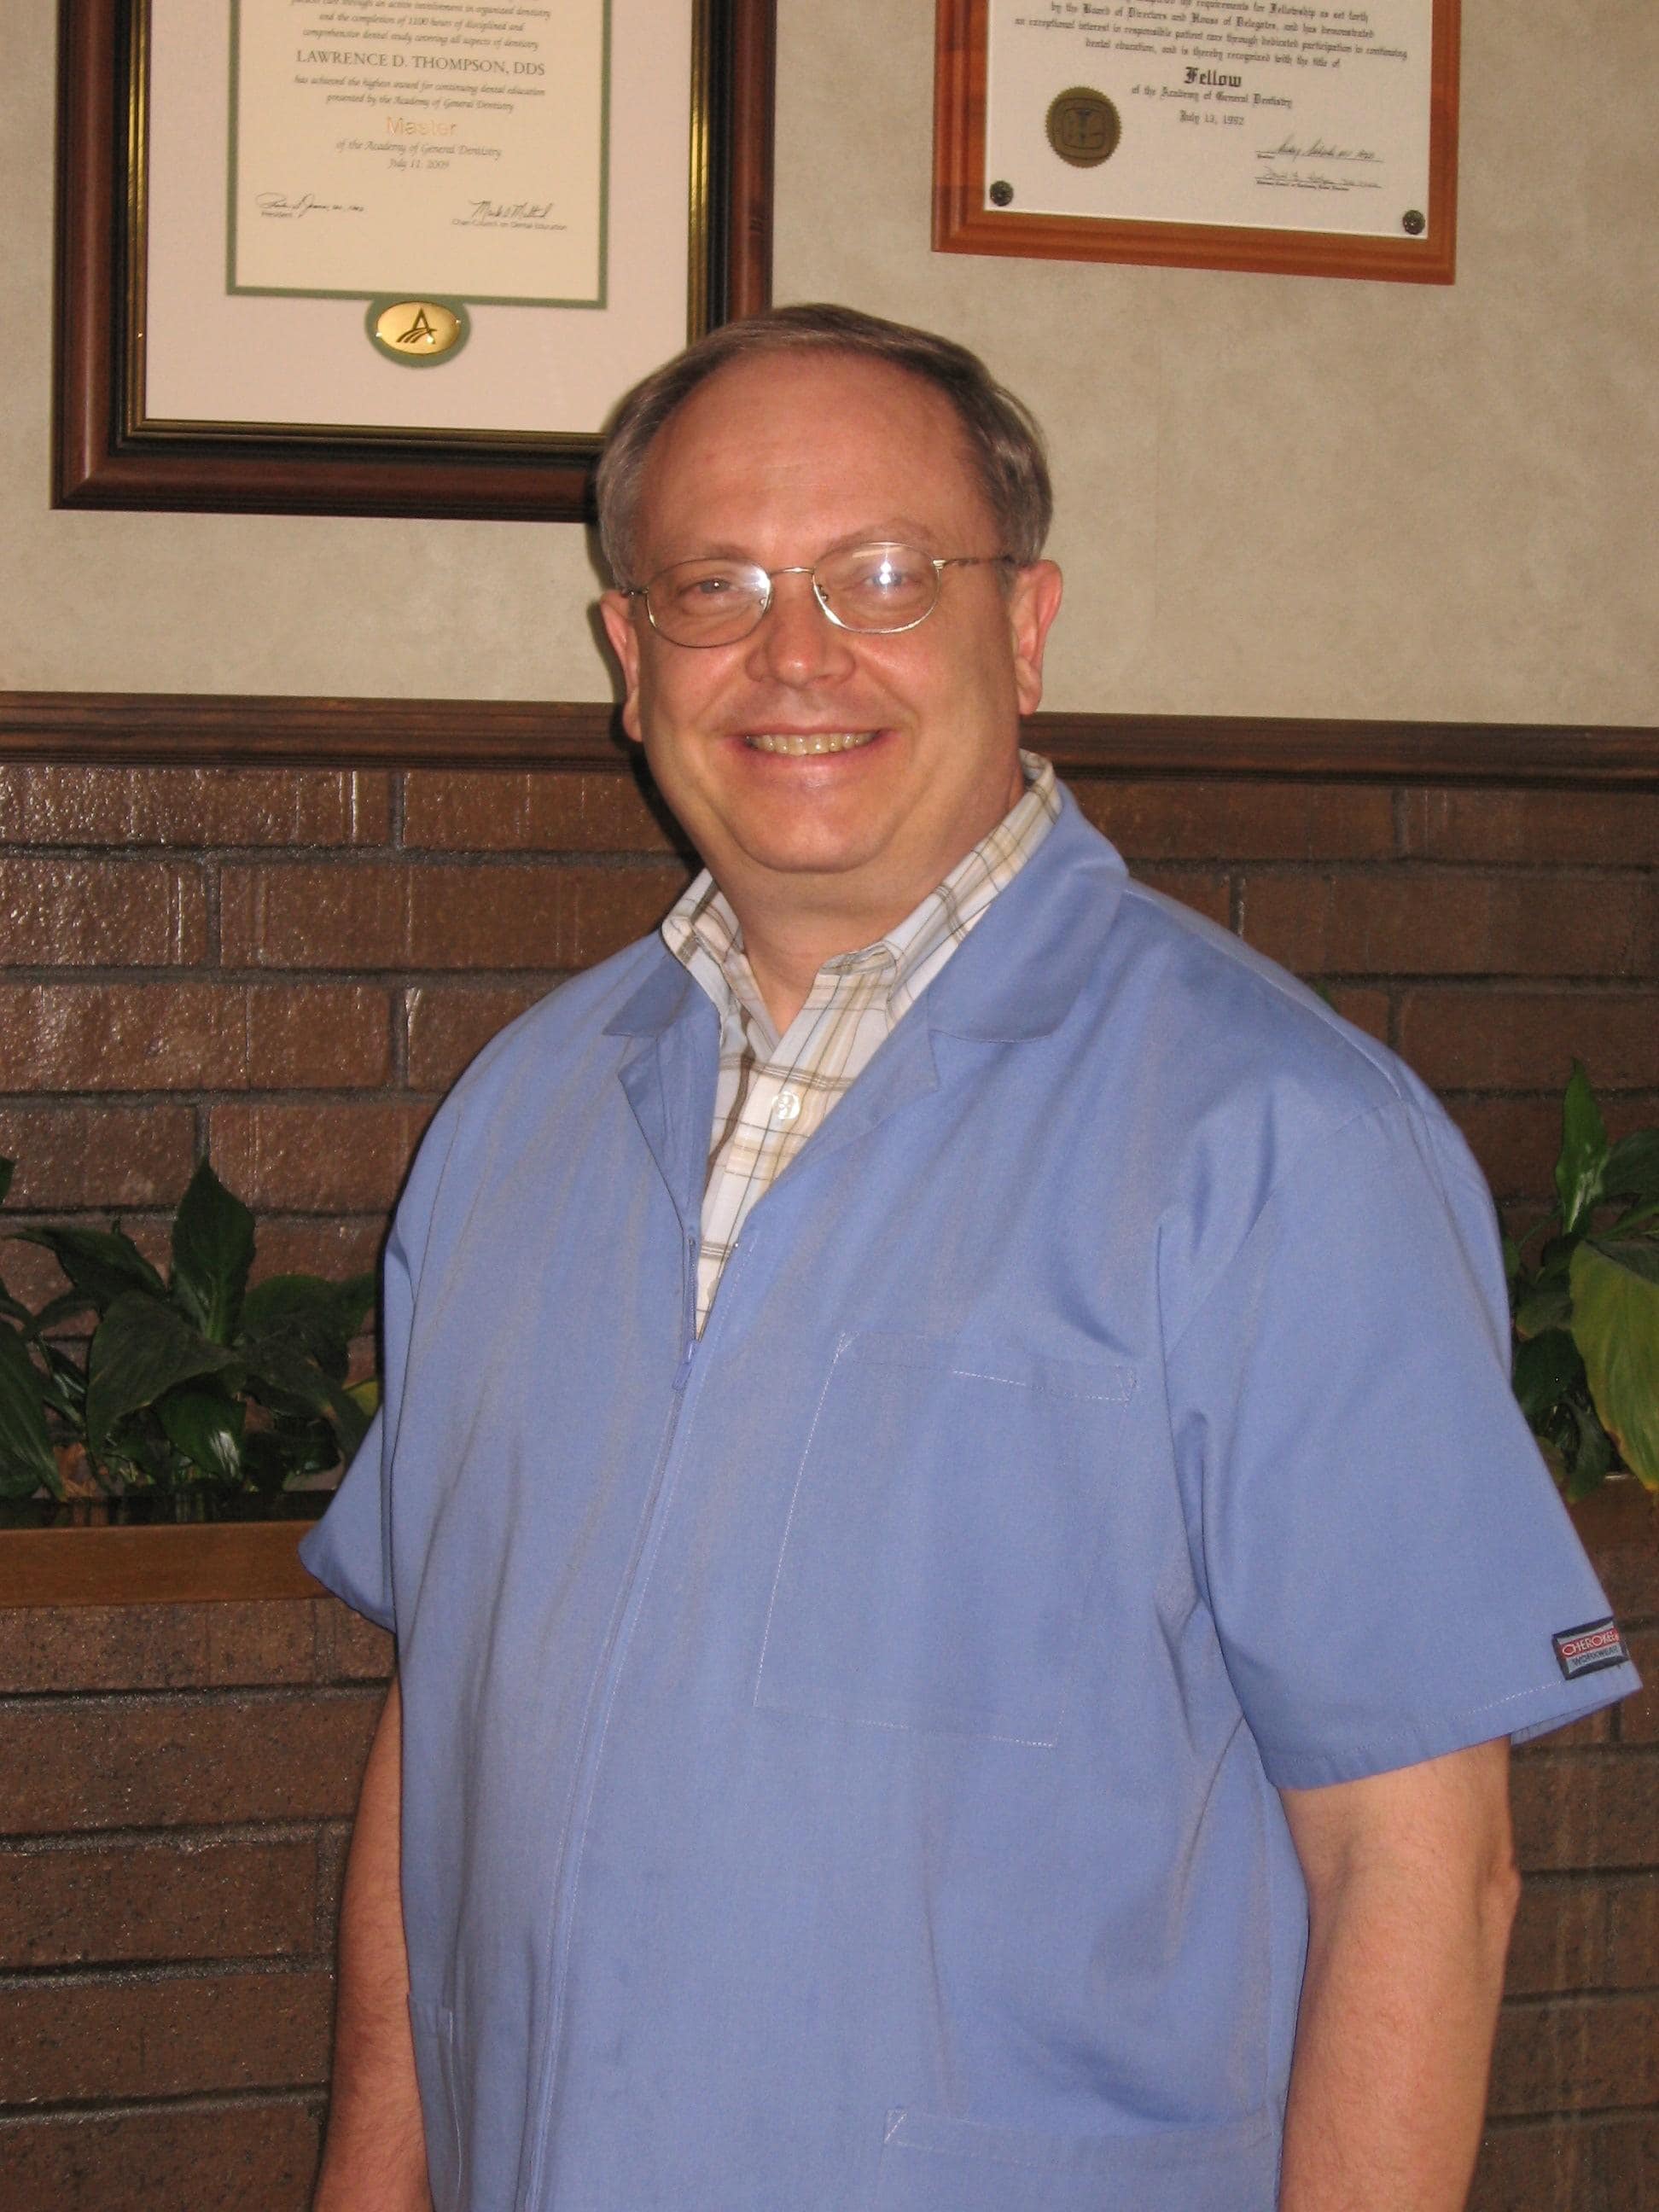 Dr. Lawrence Donald Thompson, DDS